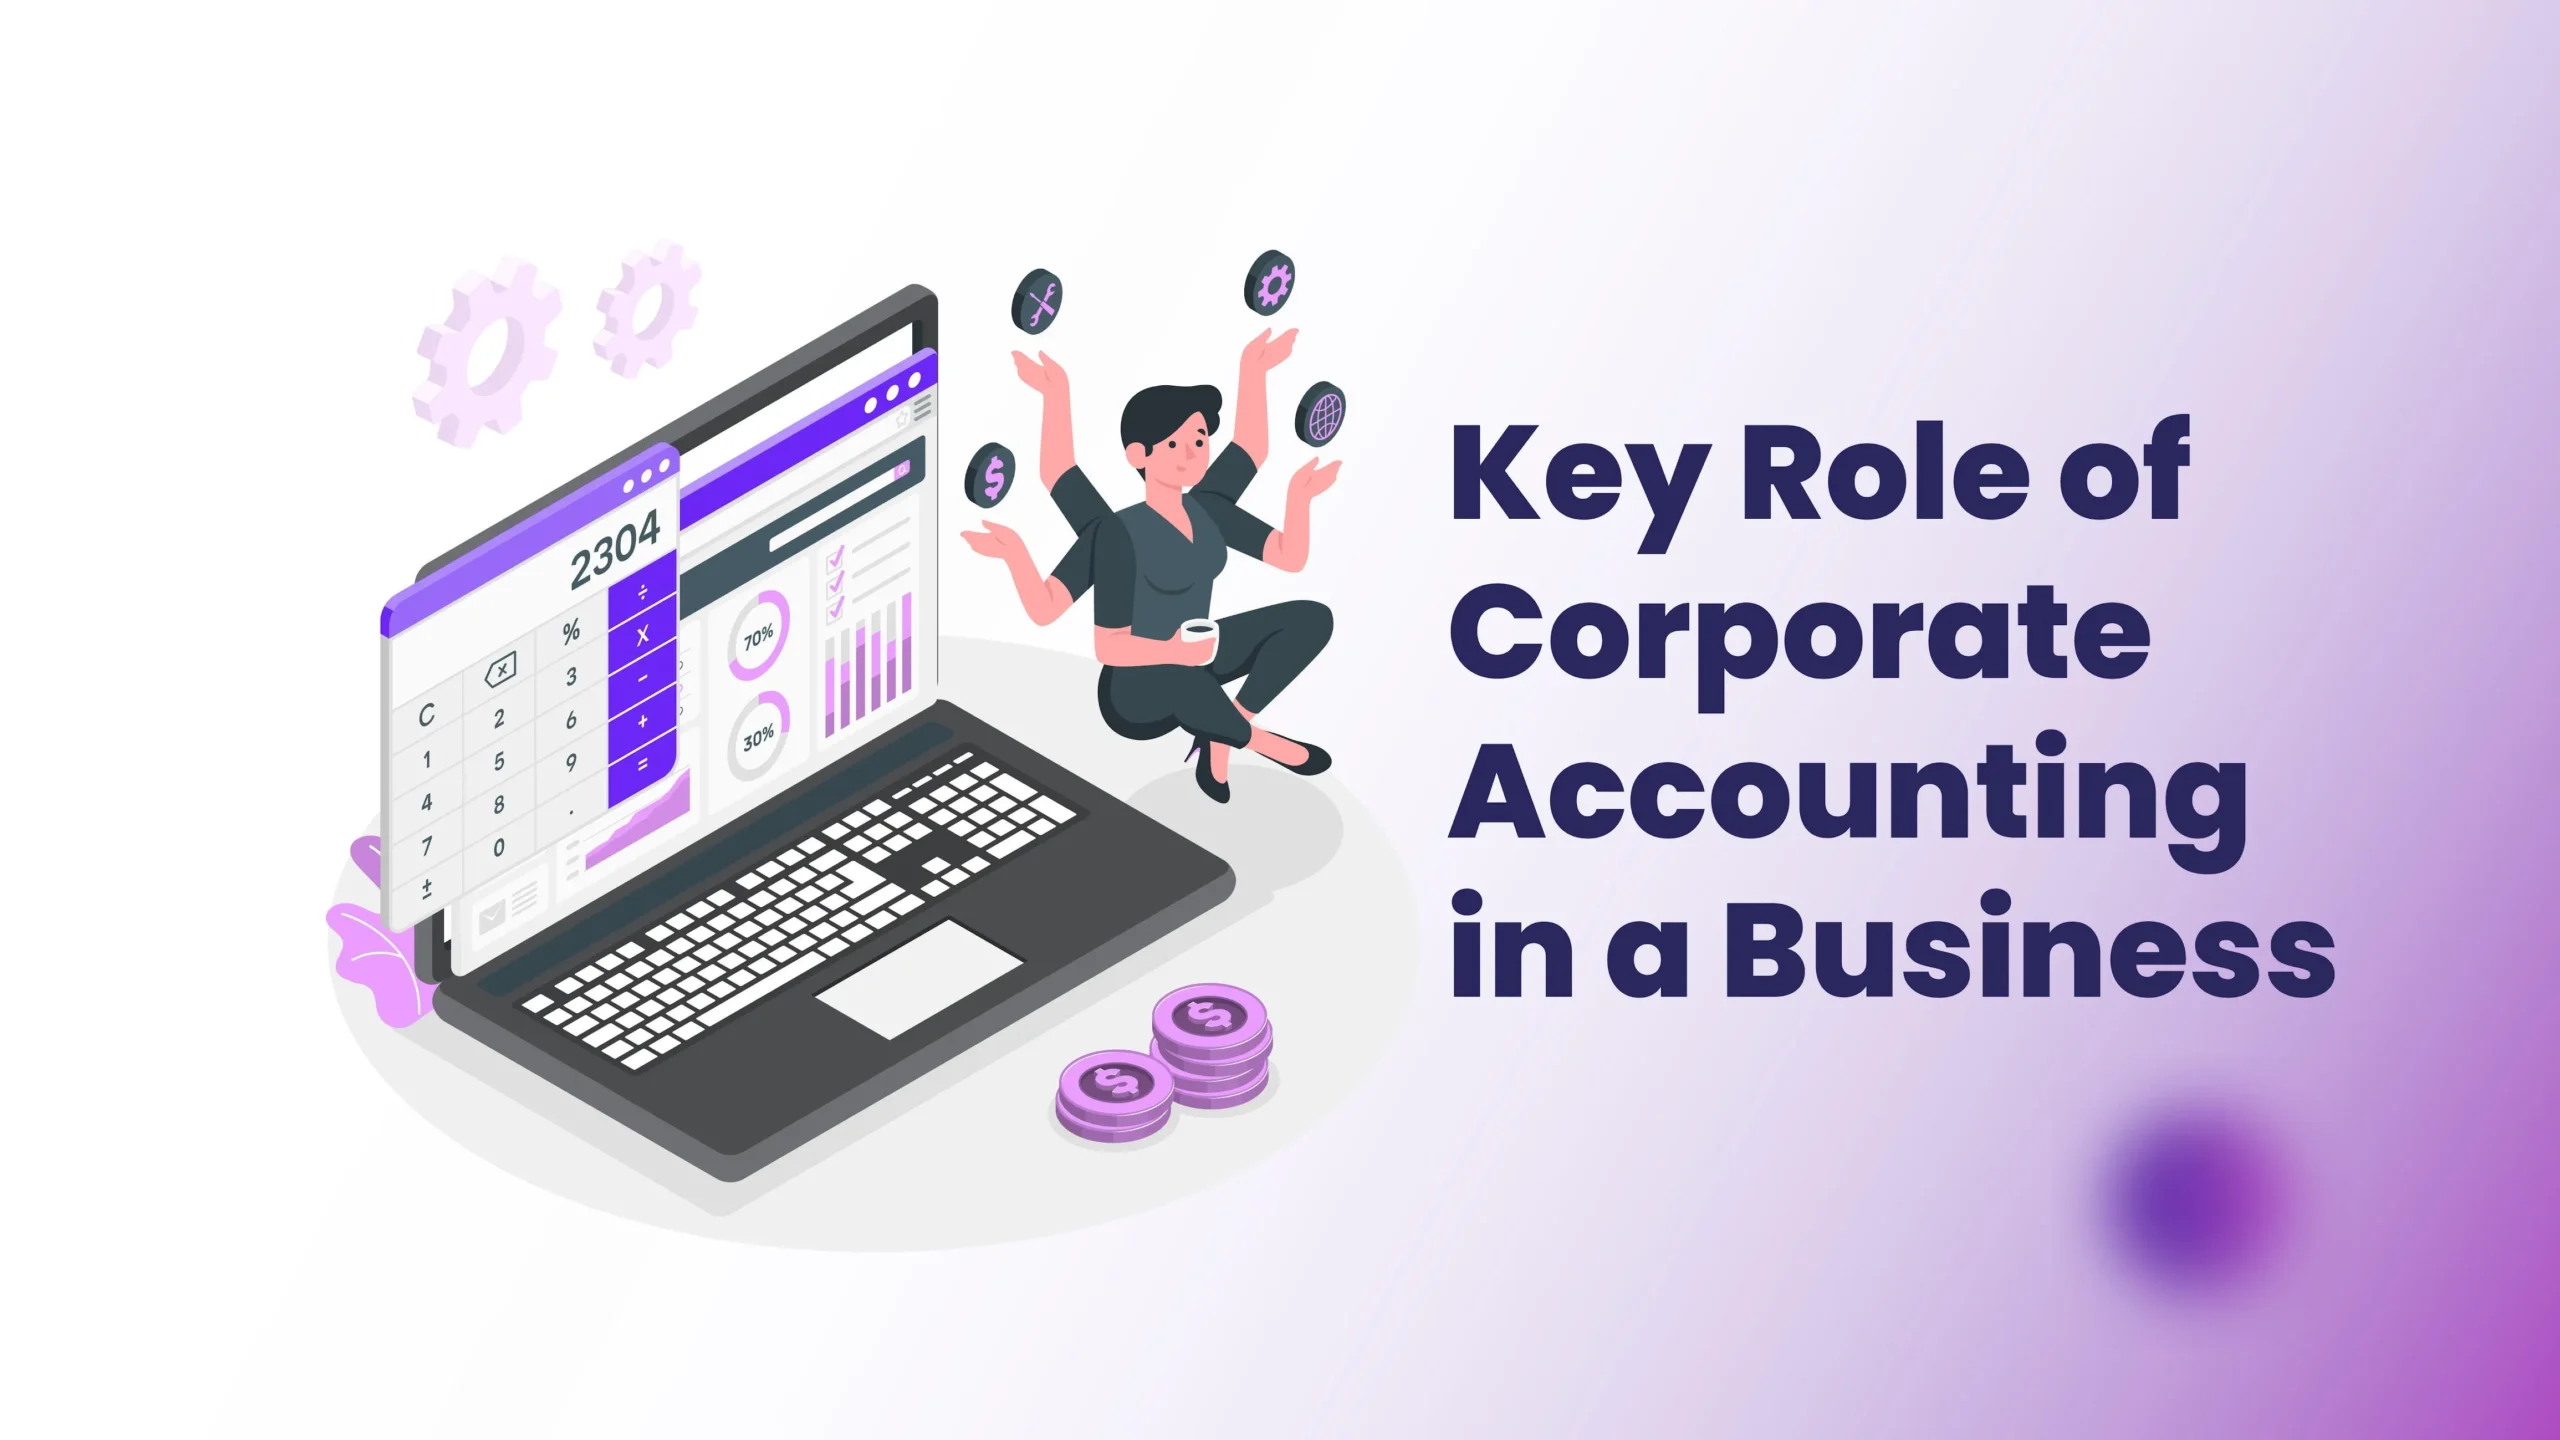 Key Role of Corporate Accounting in A Business